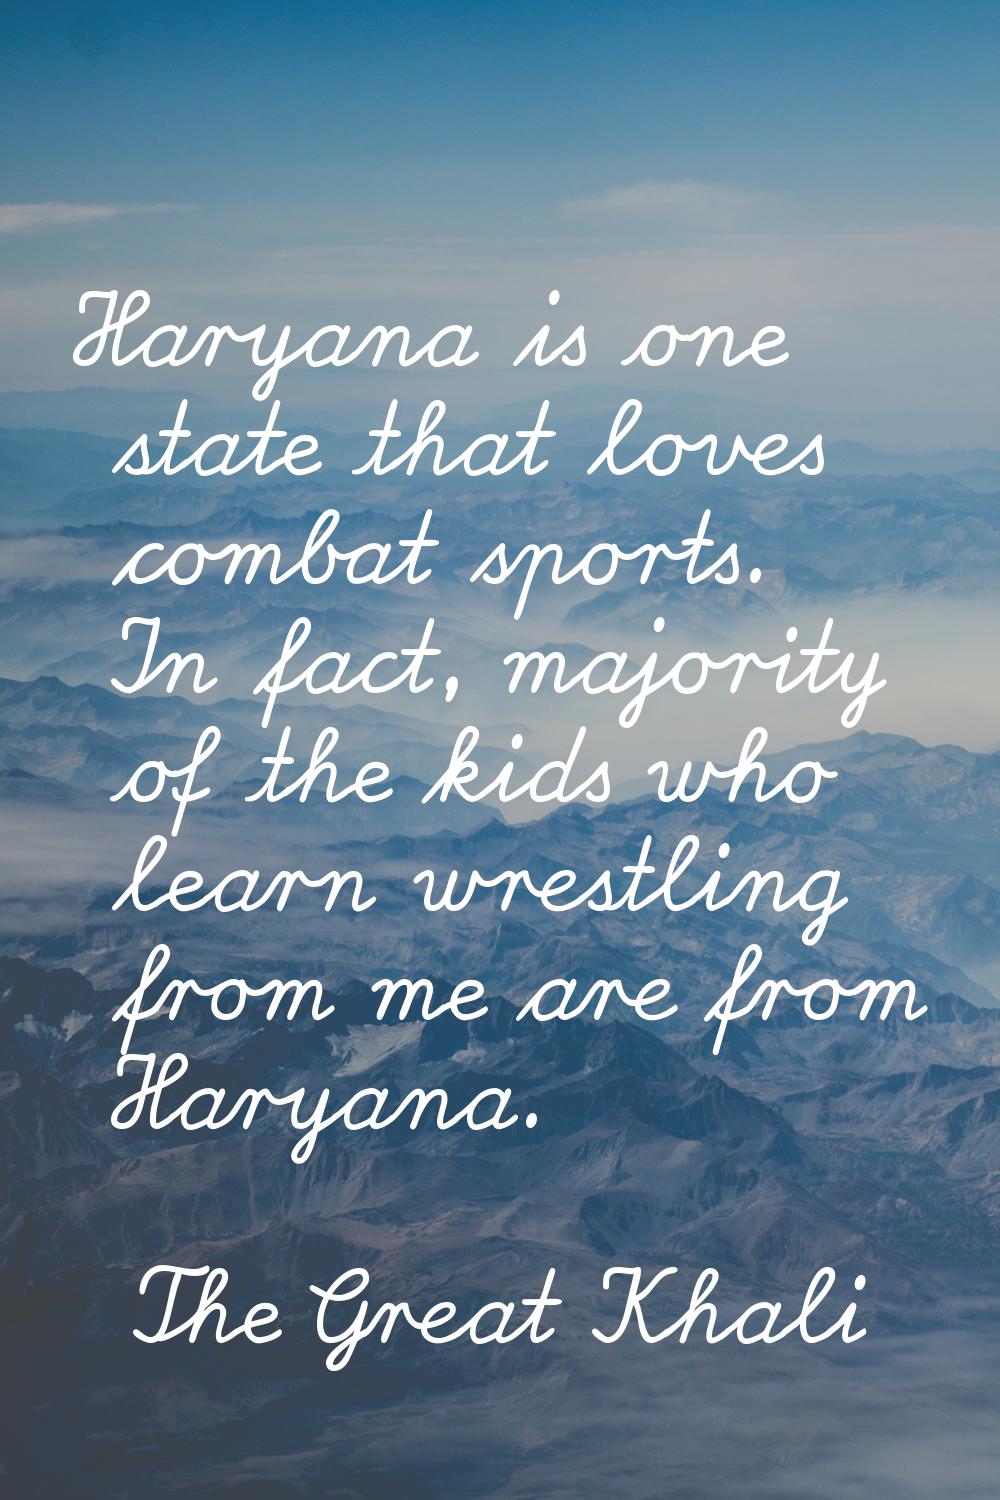 Haryana is one state that loves combat sports. In fact, majority of the kids who learn wrestling fr